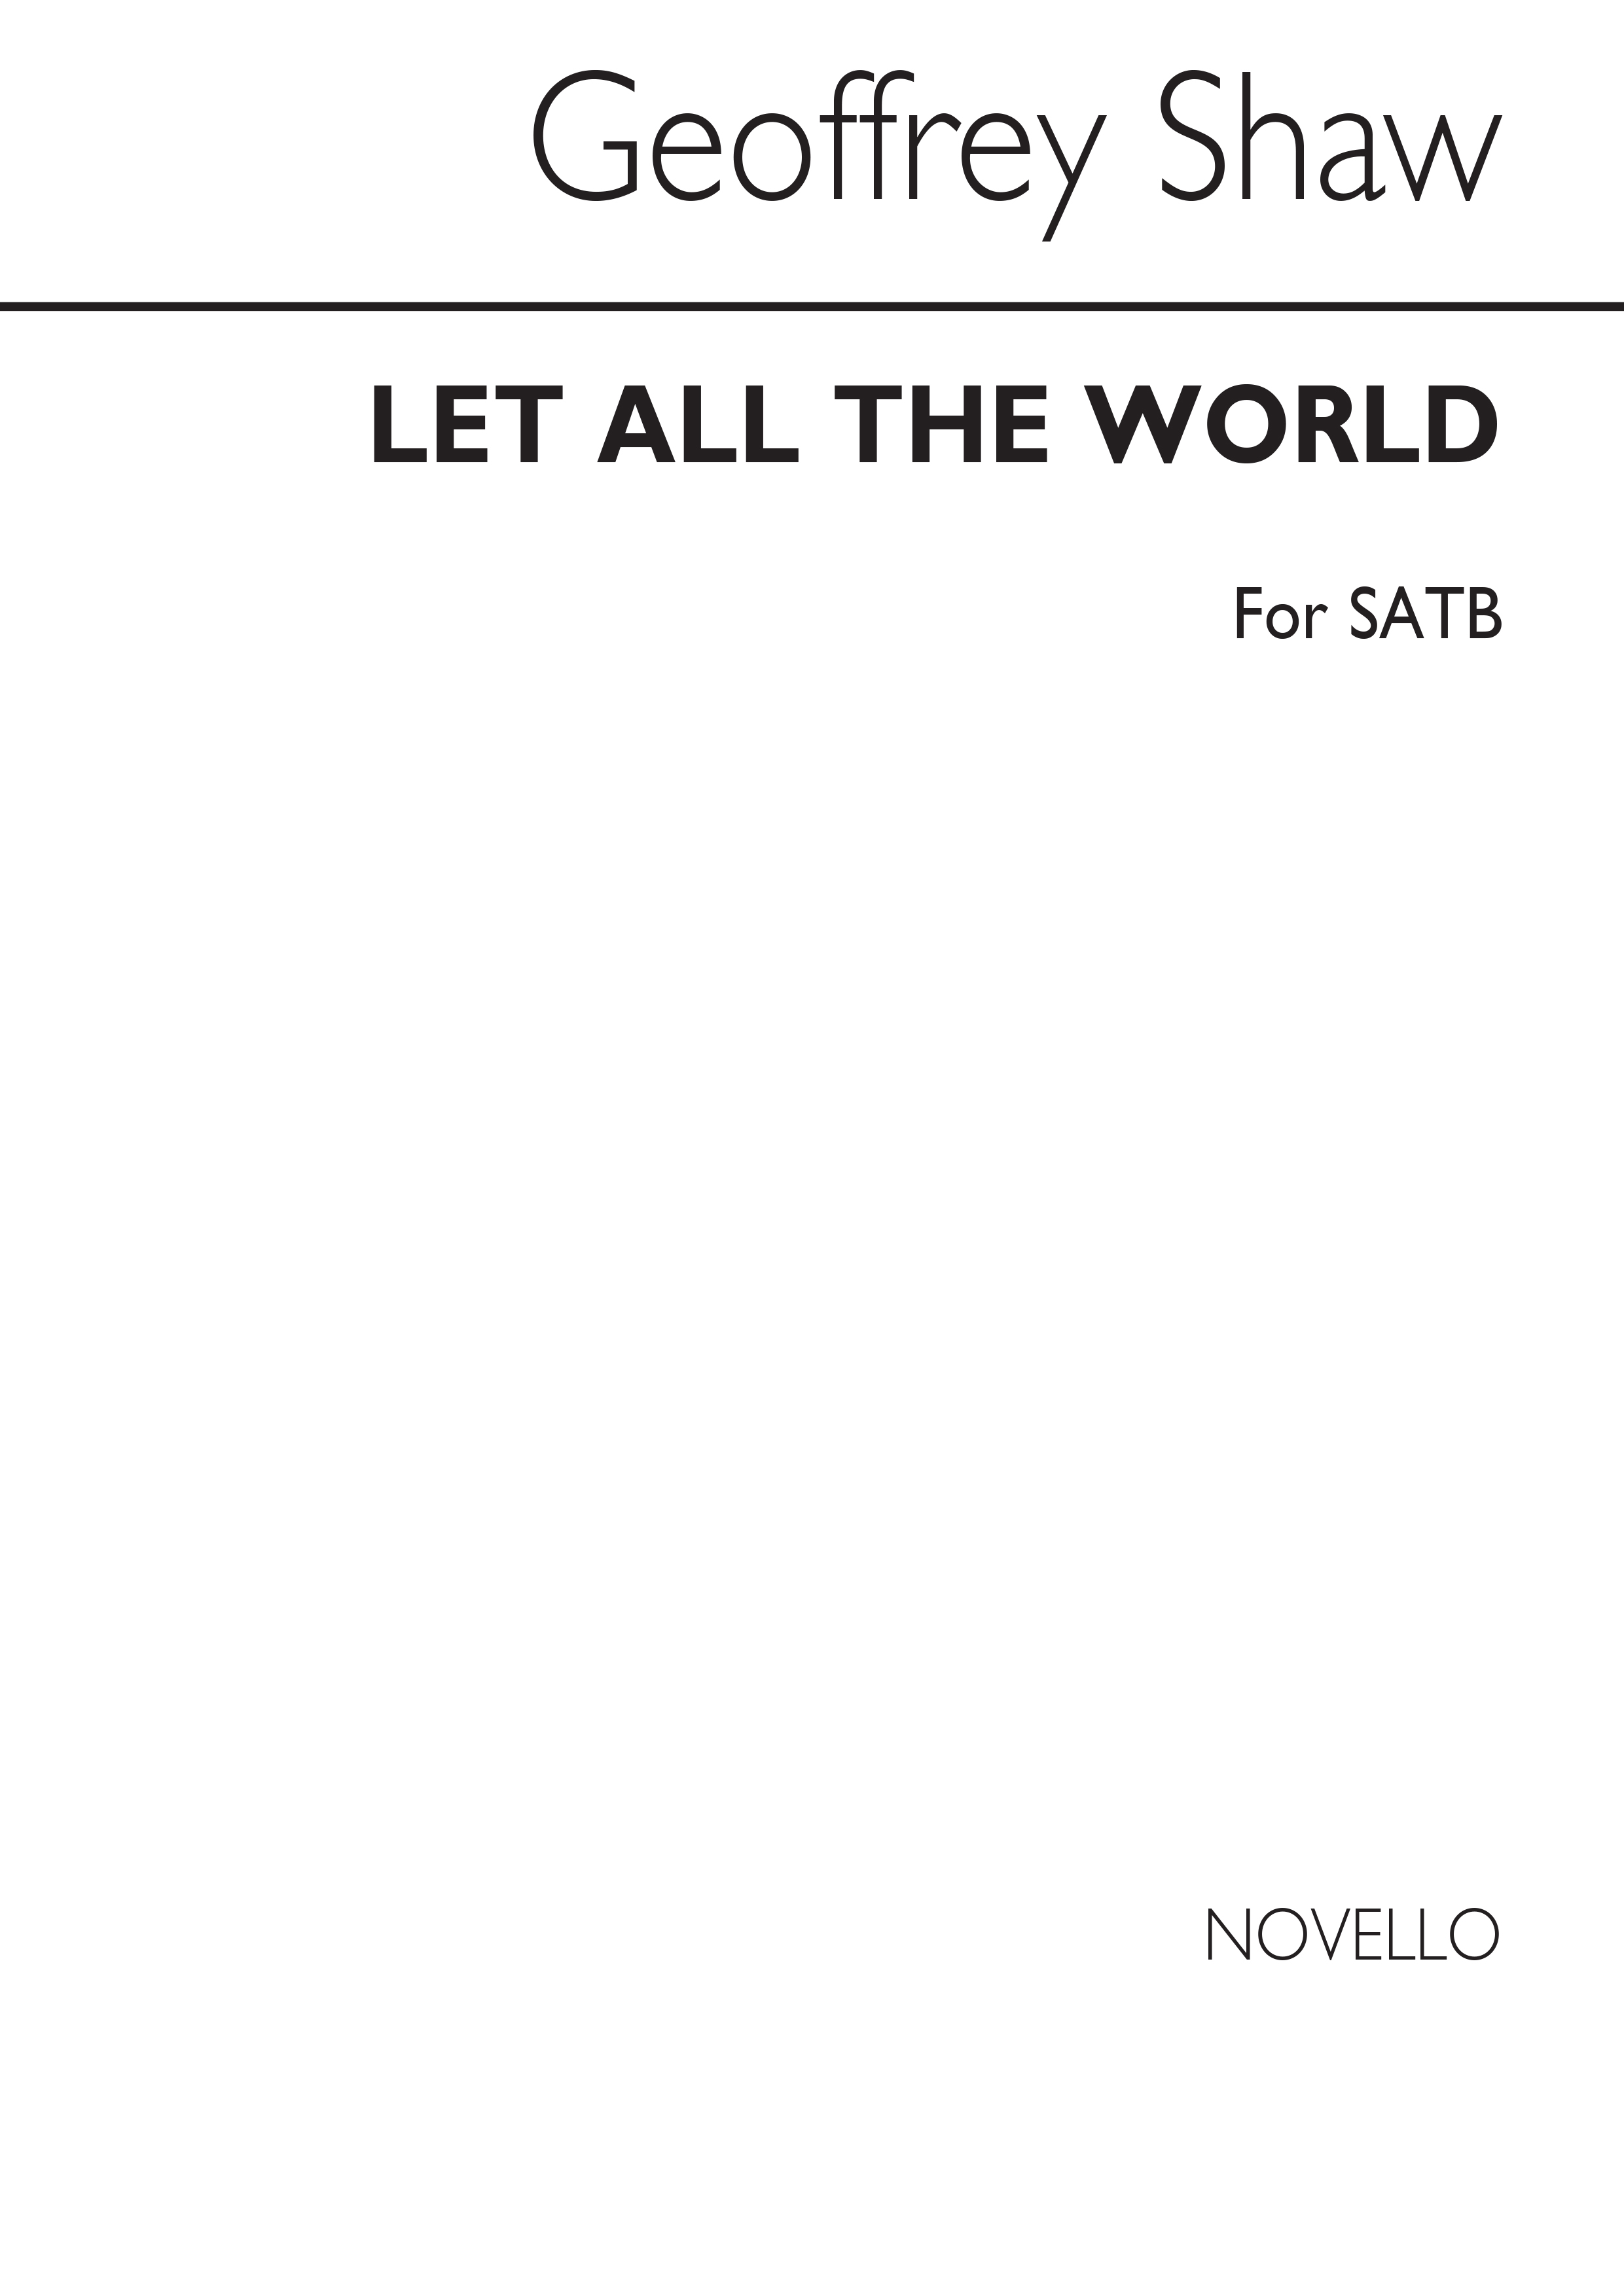 Martin Shaw: Let All The World for SATB Chorus